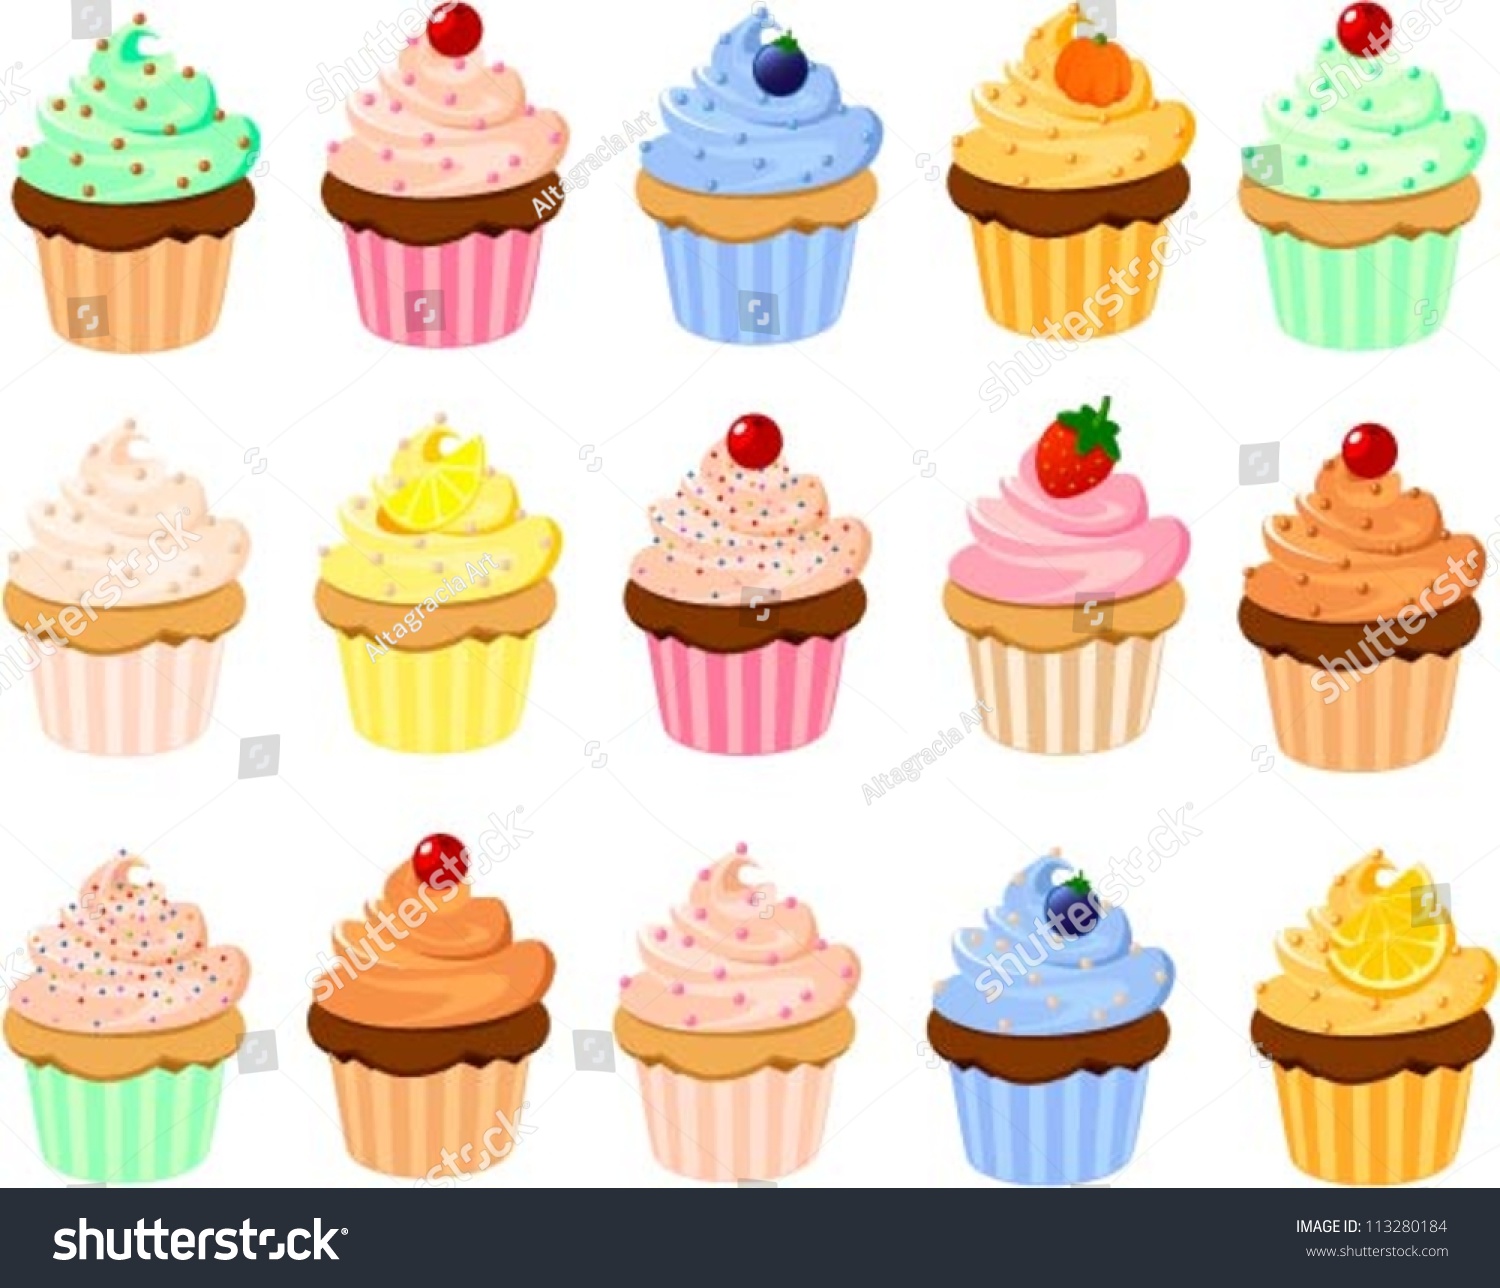 SVG of Vector illustration of various cup cakes with toppings. svg